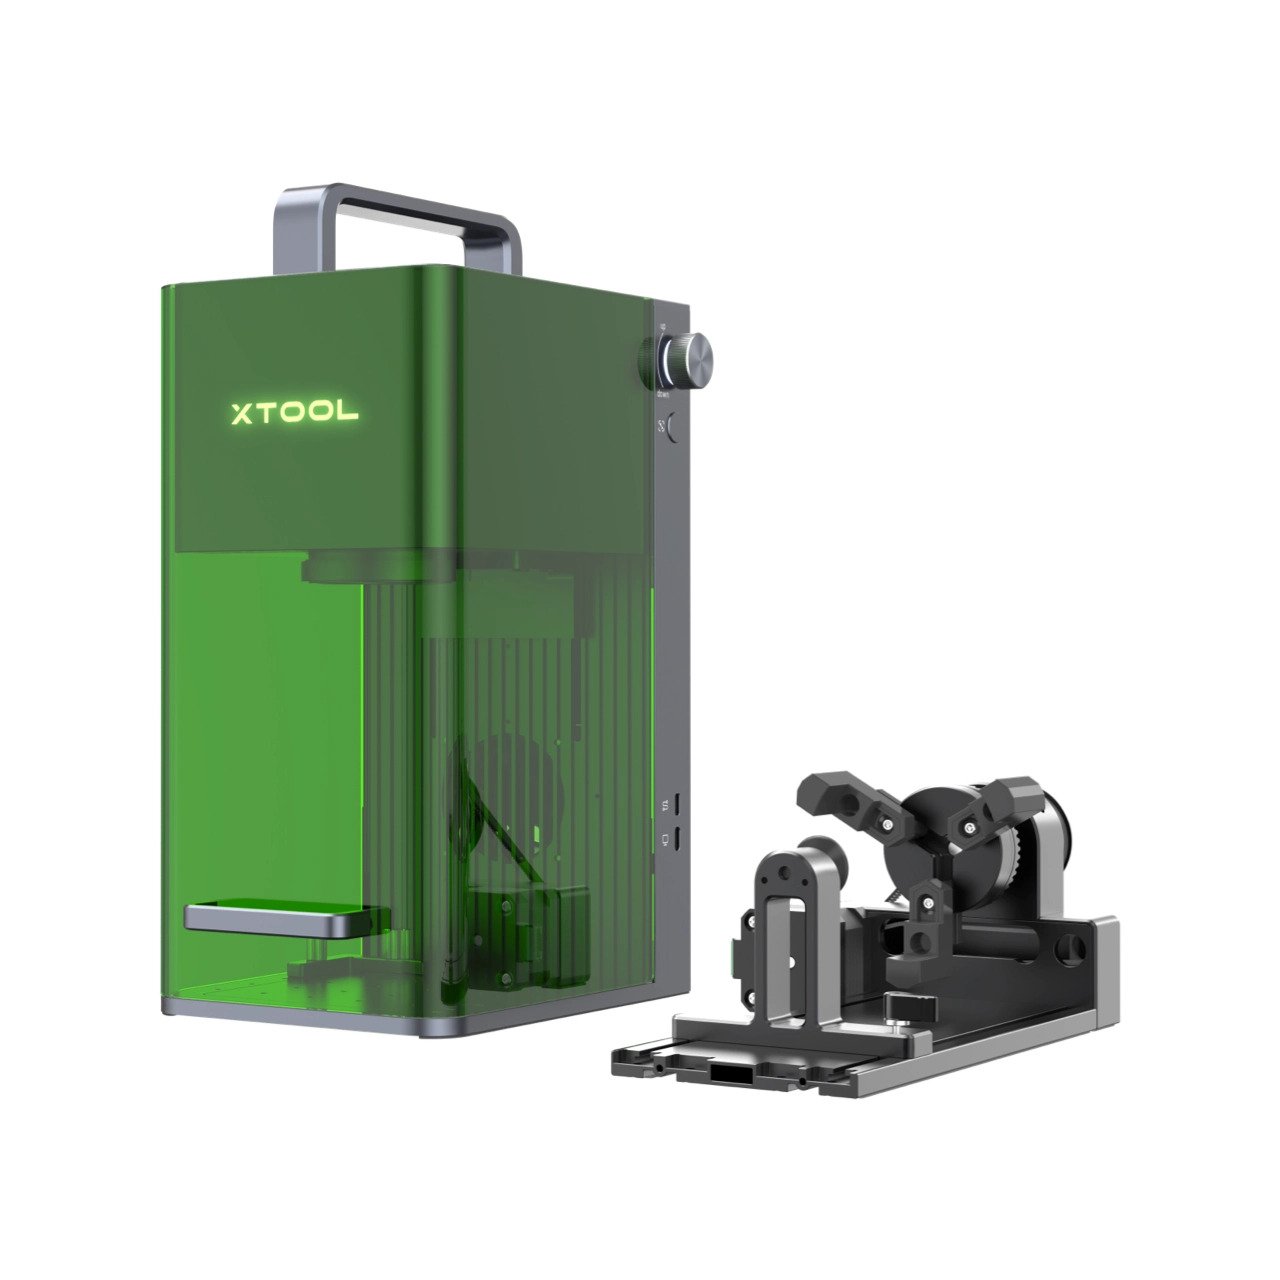 xTool F1 Portable Laser Engraver with IR & Diode Laser – Ready2STEM